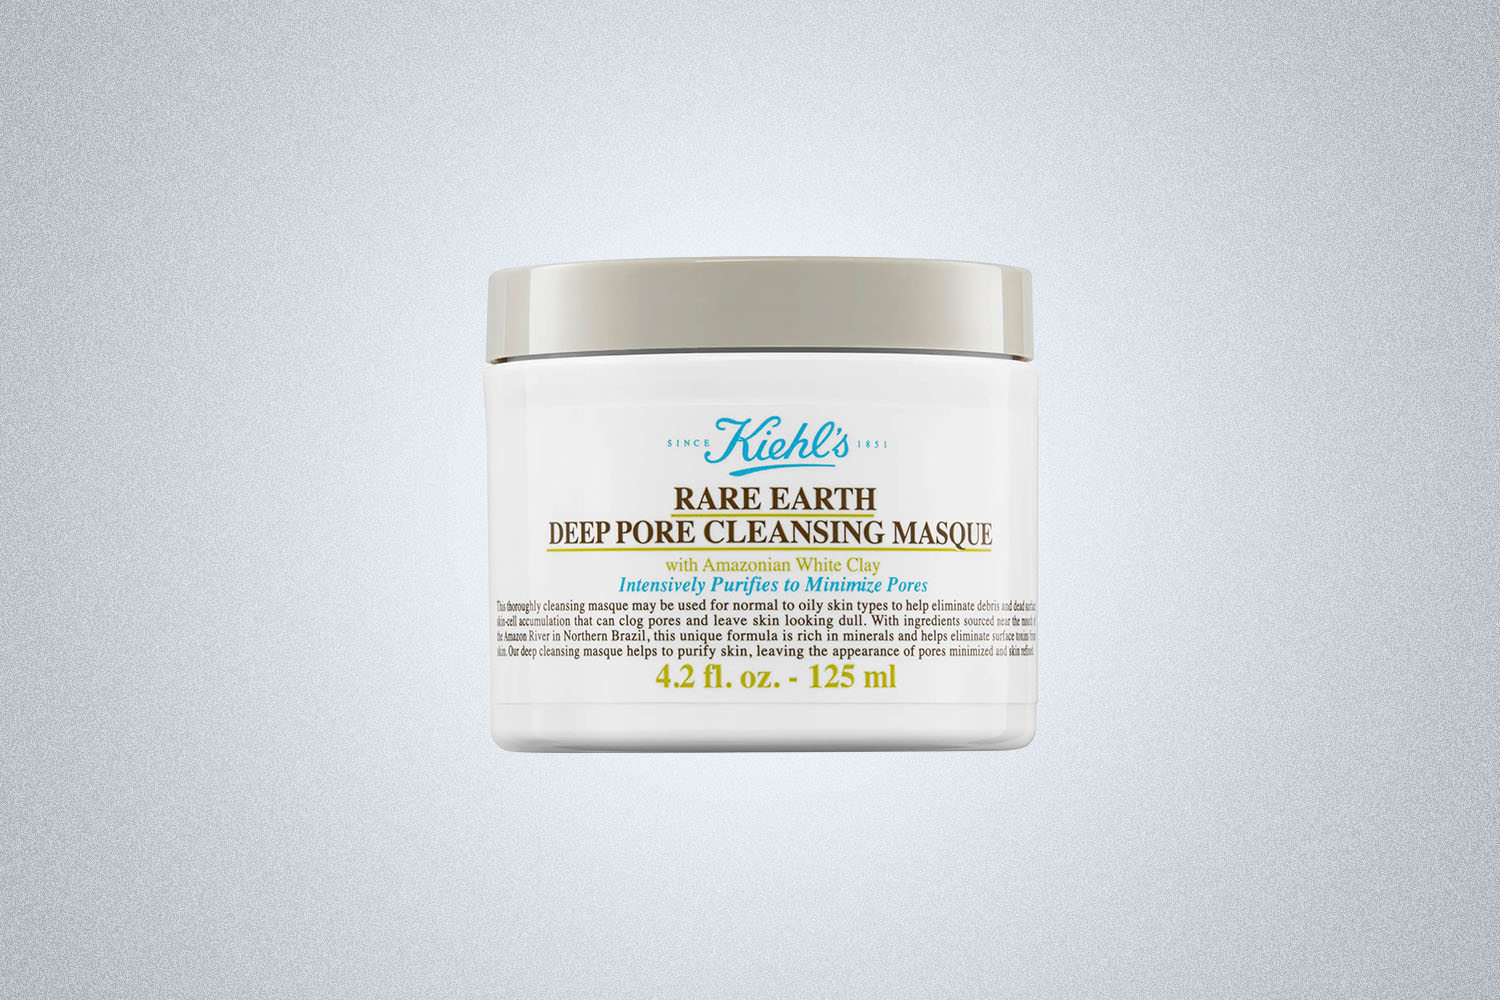 Kiehl’s Rare Earth Deep Pore Cleansing Face Mask